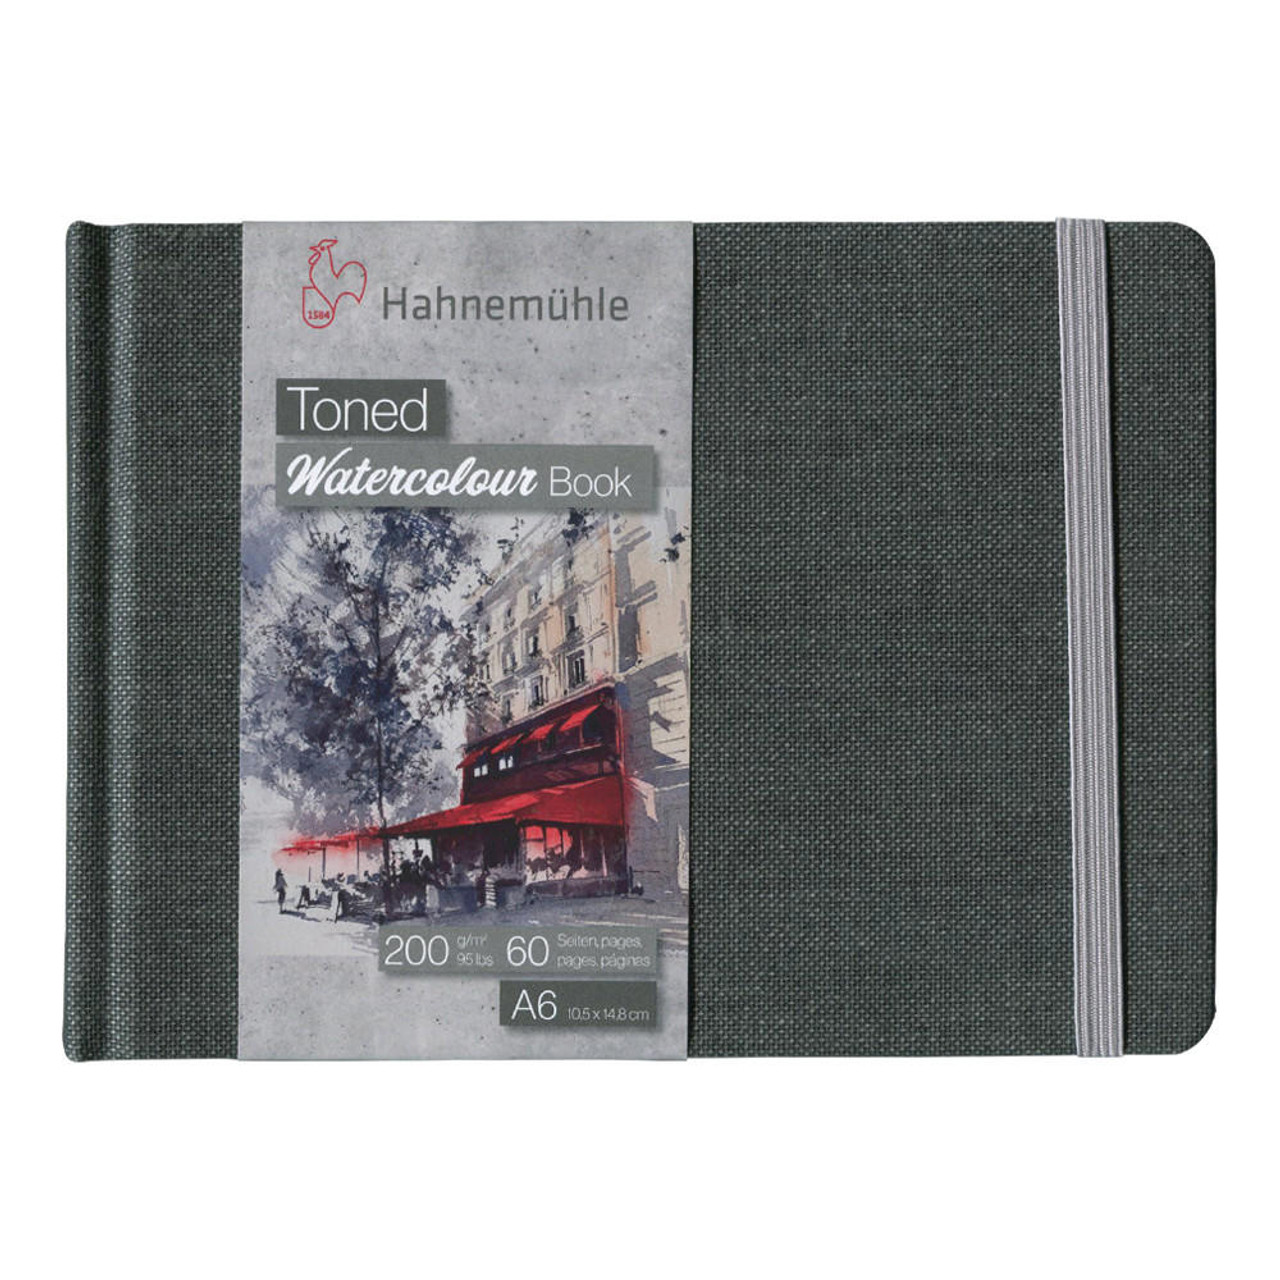 Hahnemuhle Toned Grey Watercolor Paper Book, 30 Sheets, Landscape, A6 (4.1  x 5.8)